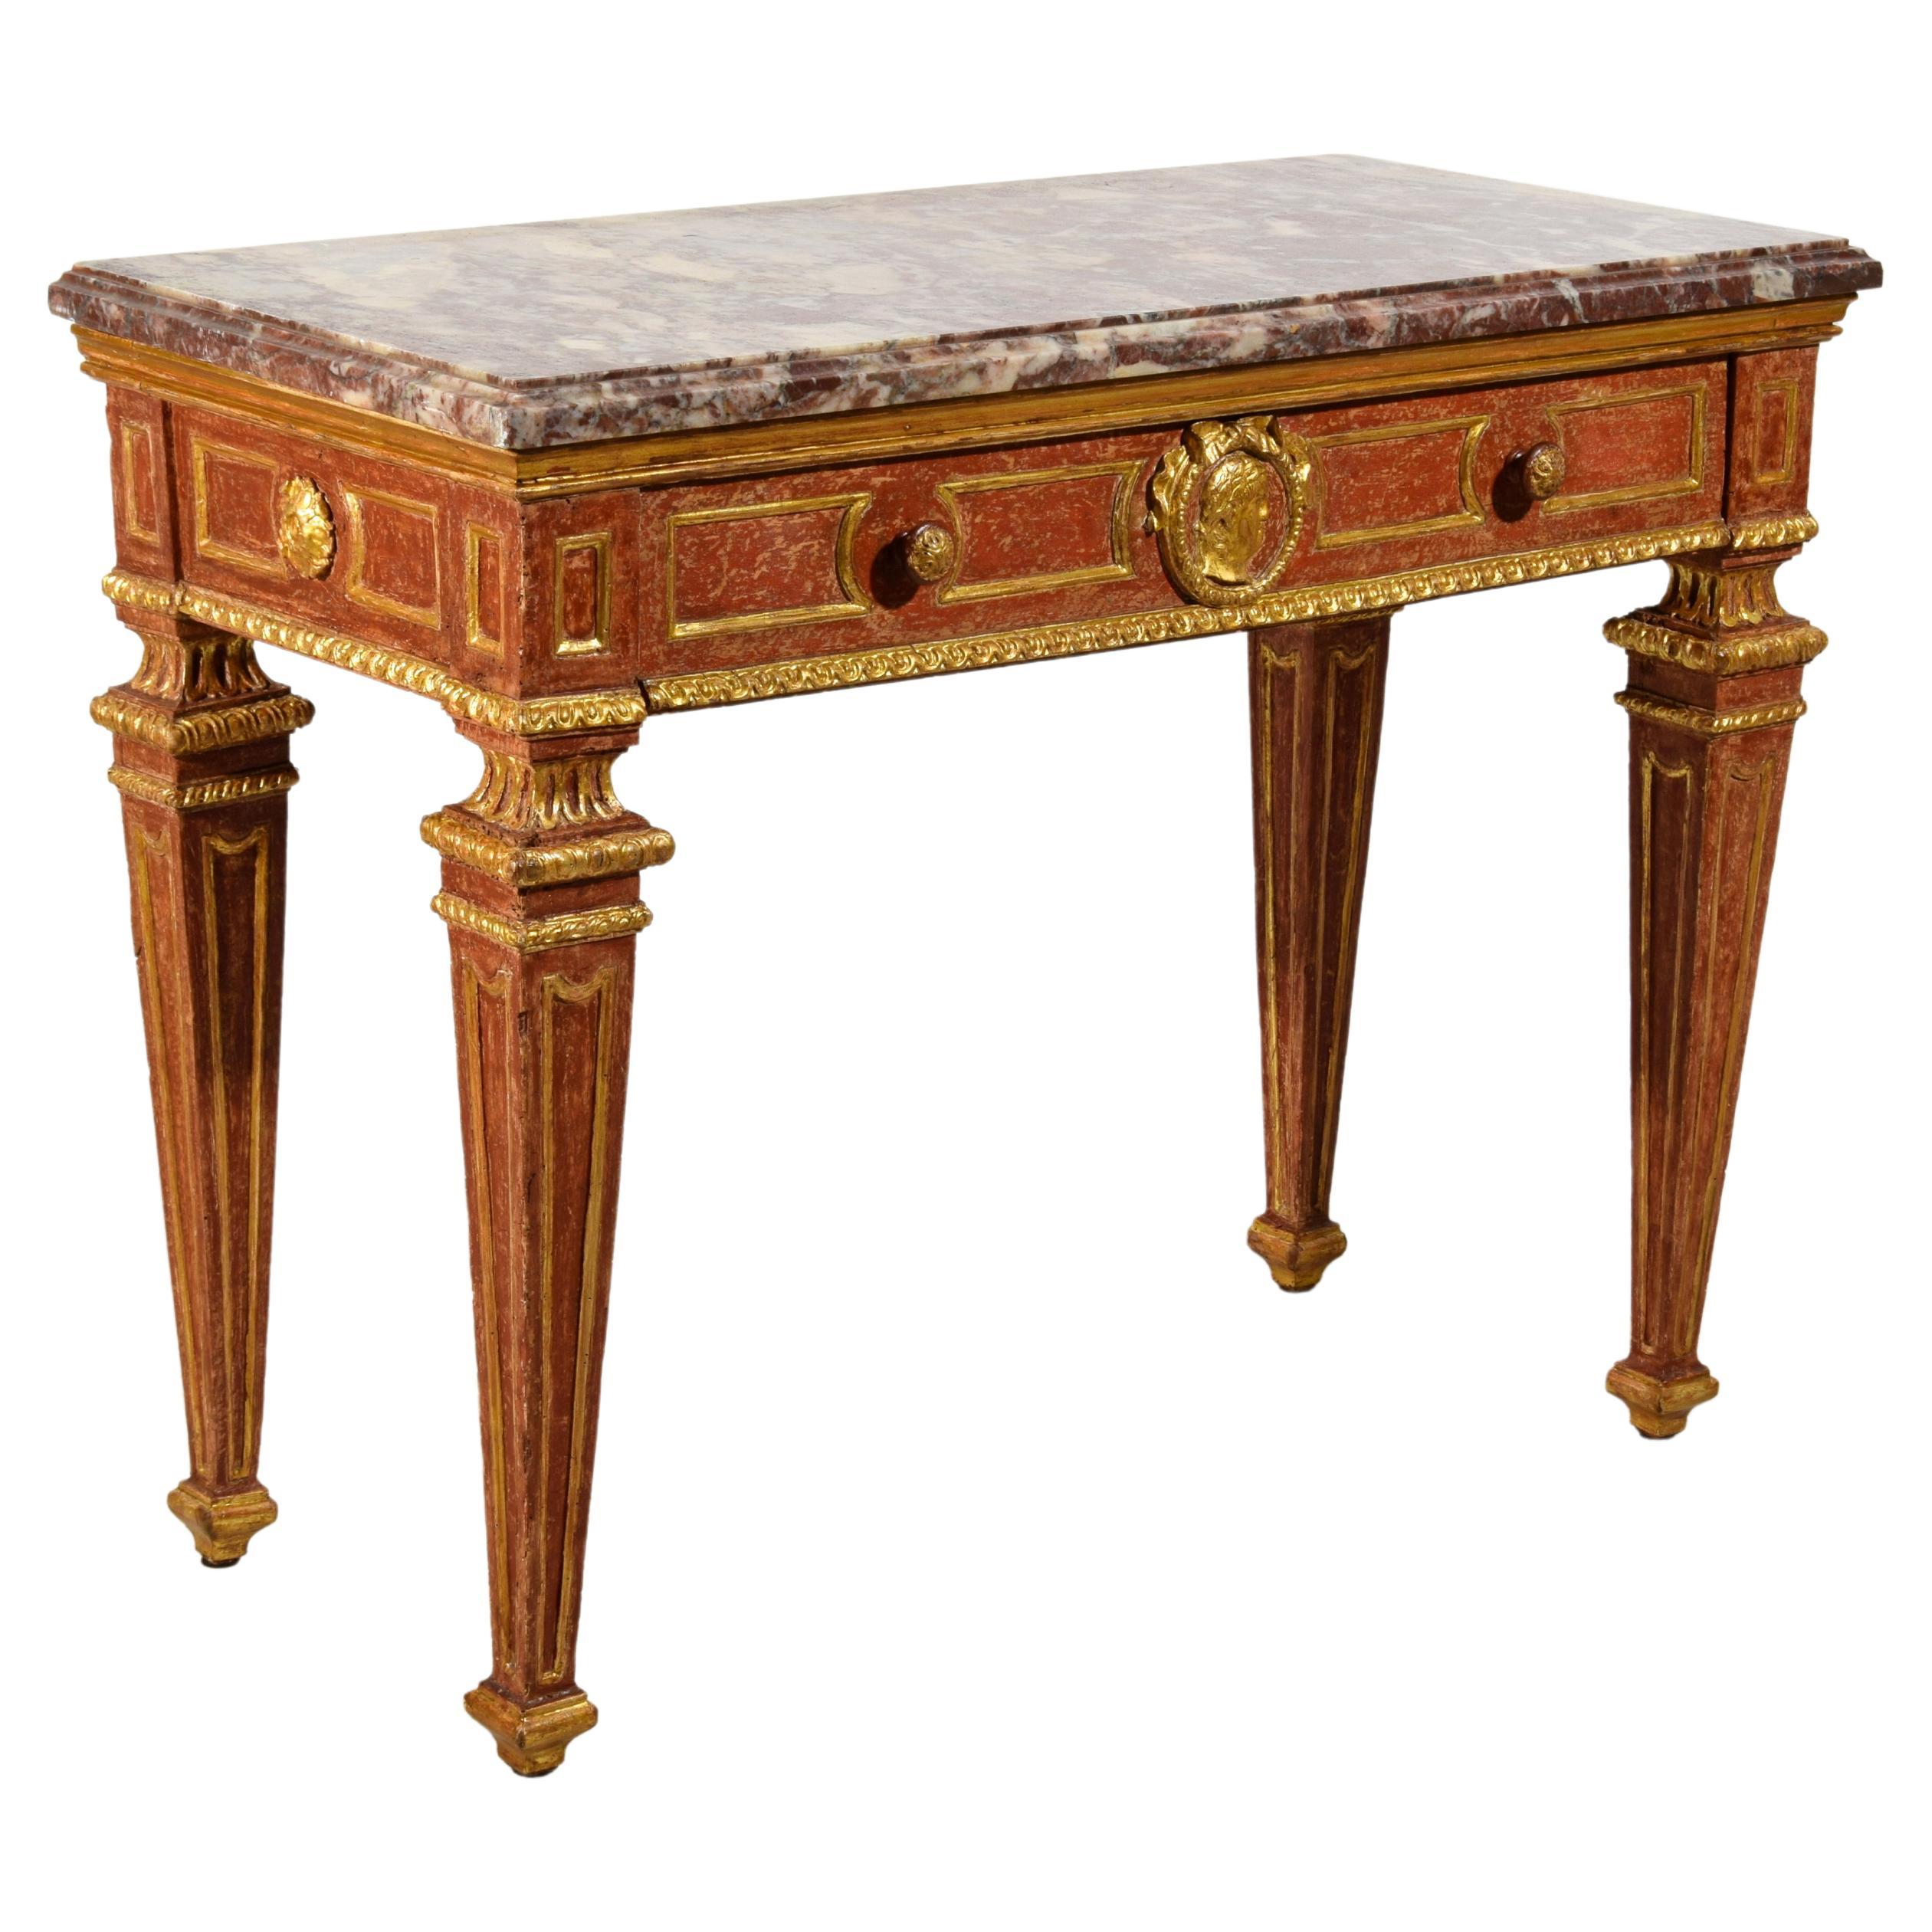 18th Century, Italian Neoclassical Gilded and Red Lacquered Wood with Marble Top For Sale